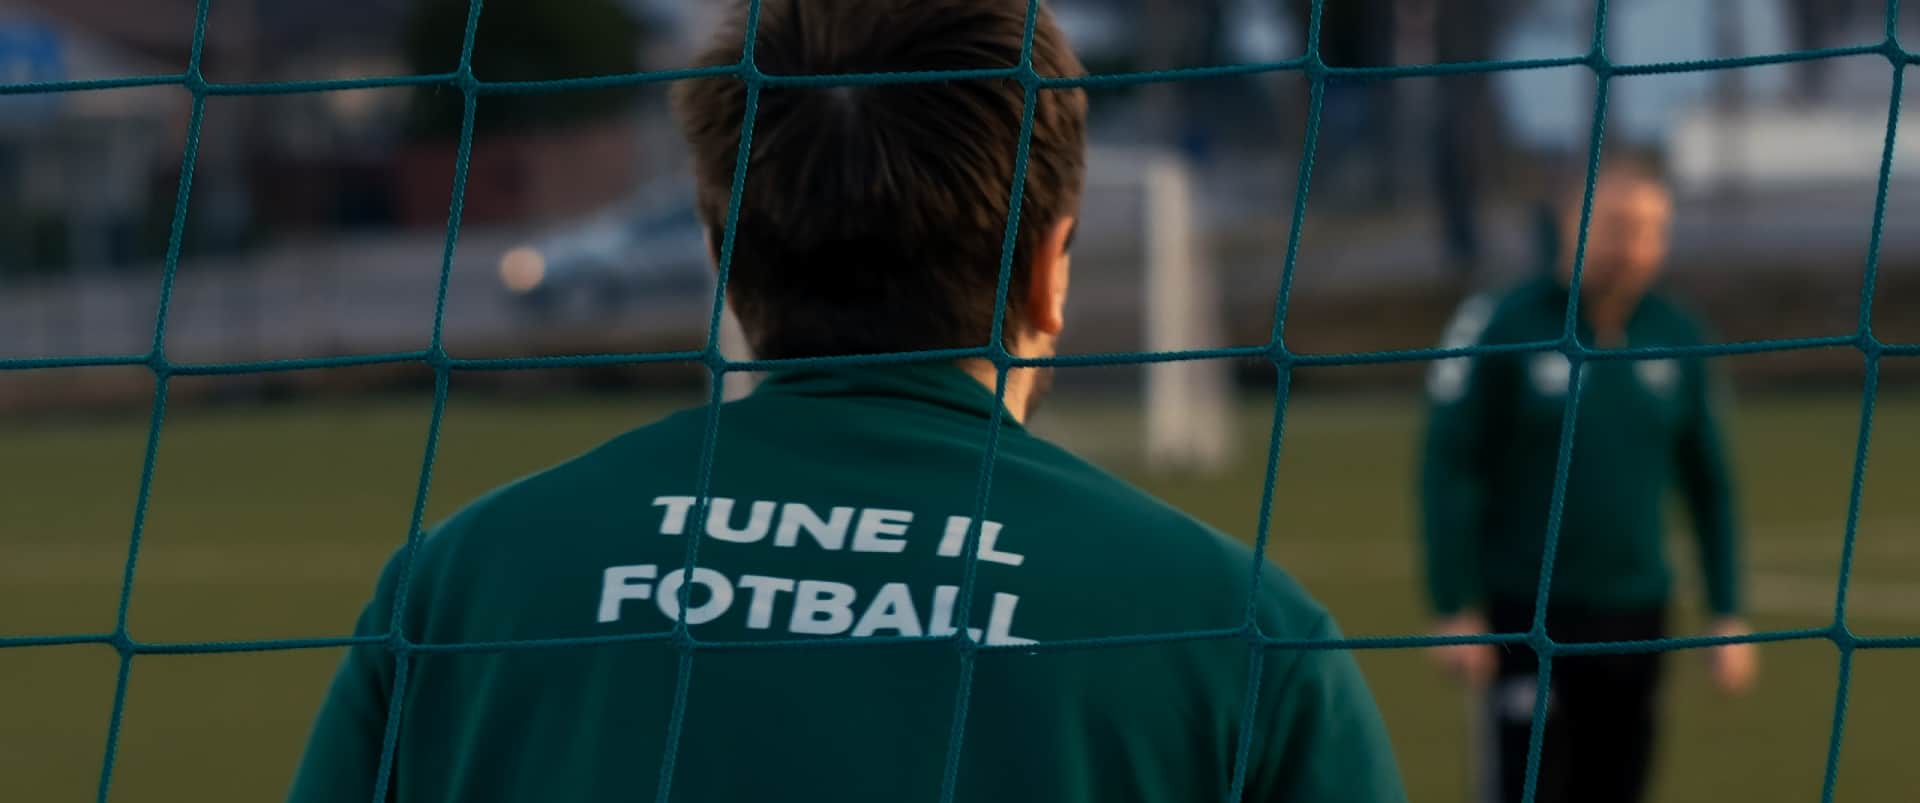 Advertising for Tune IL Football